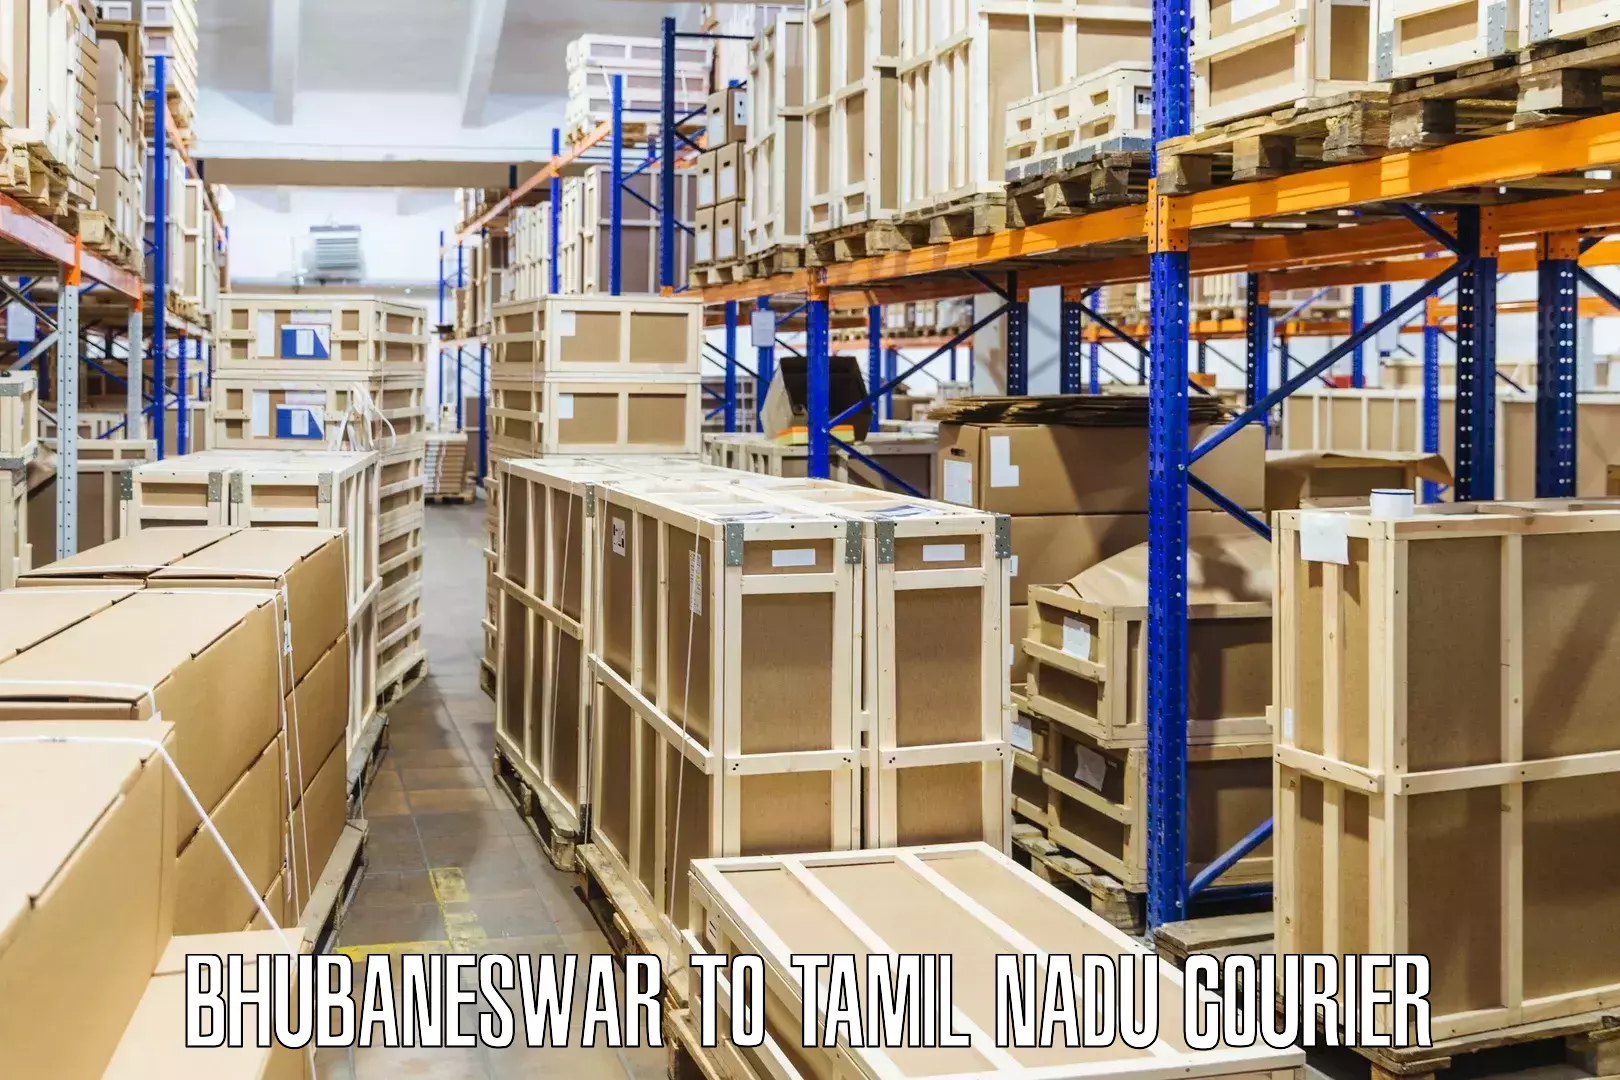 Easy access courier services in Bhubaneswar to Tamil Nadu